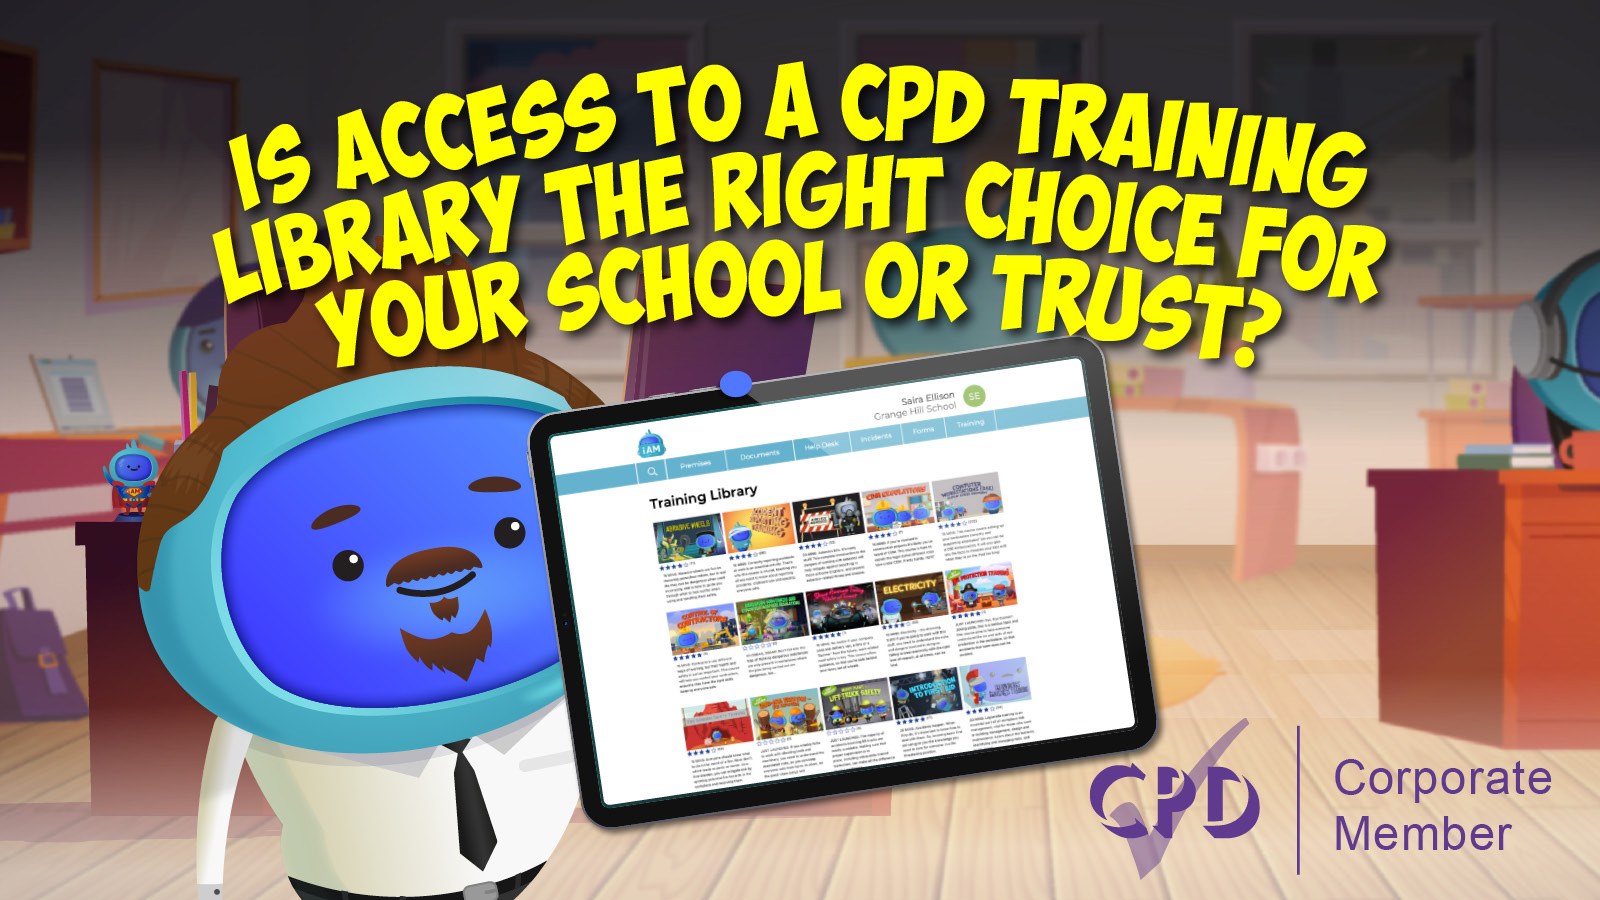 CPD Training Library